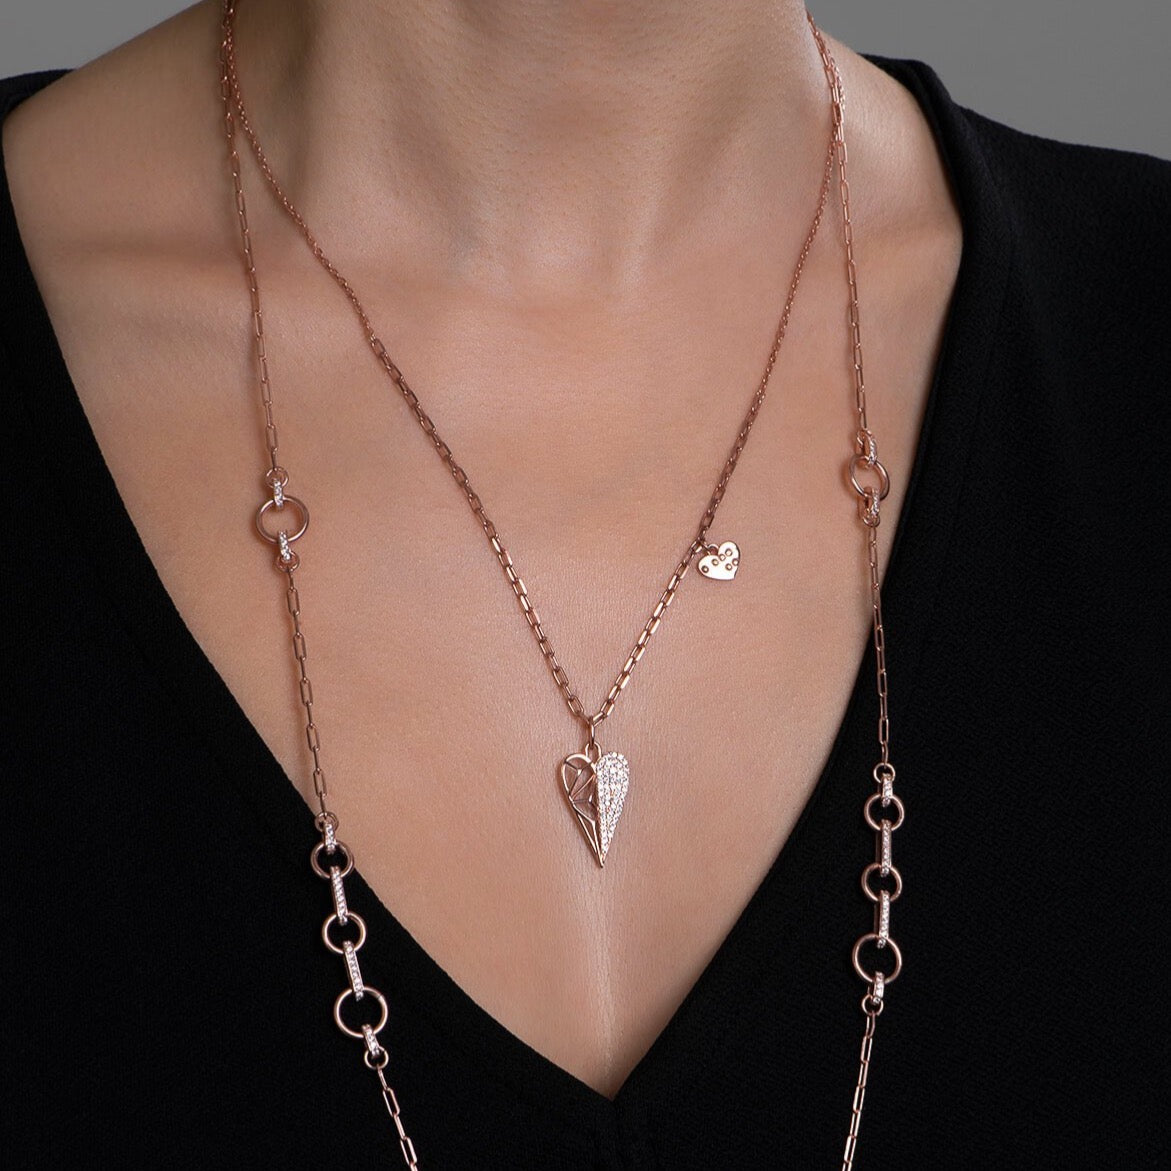 Silver heart shape pendant necklace on neck of a model.